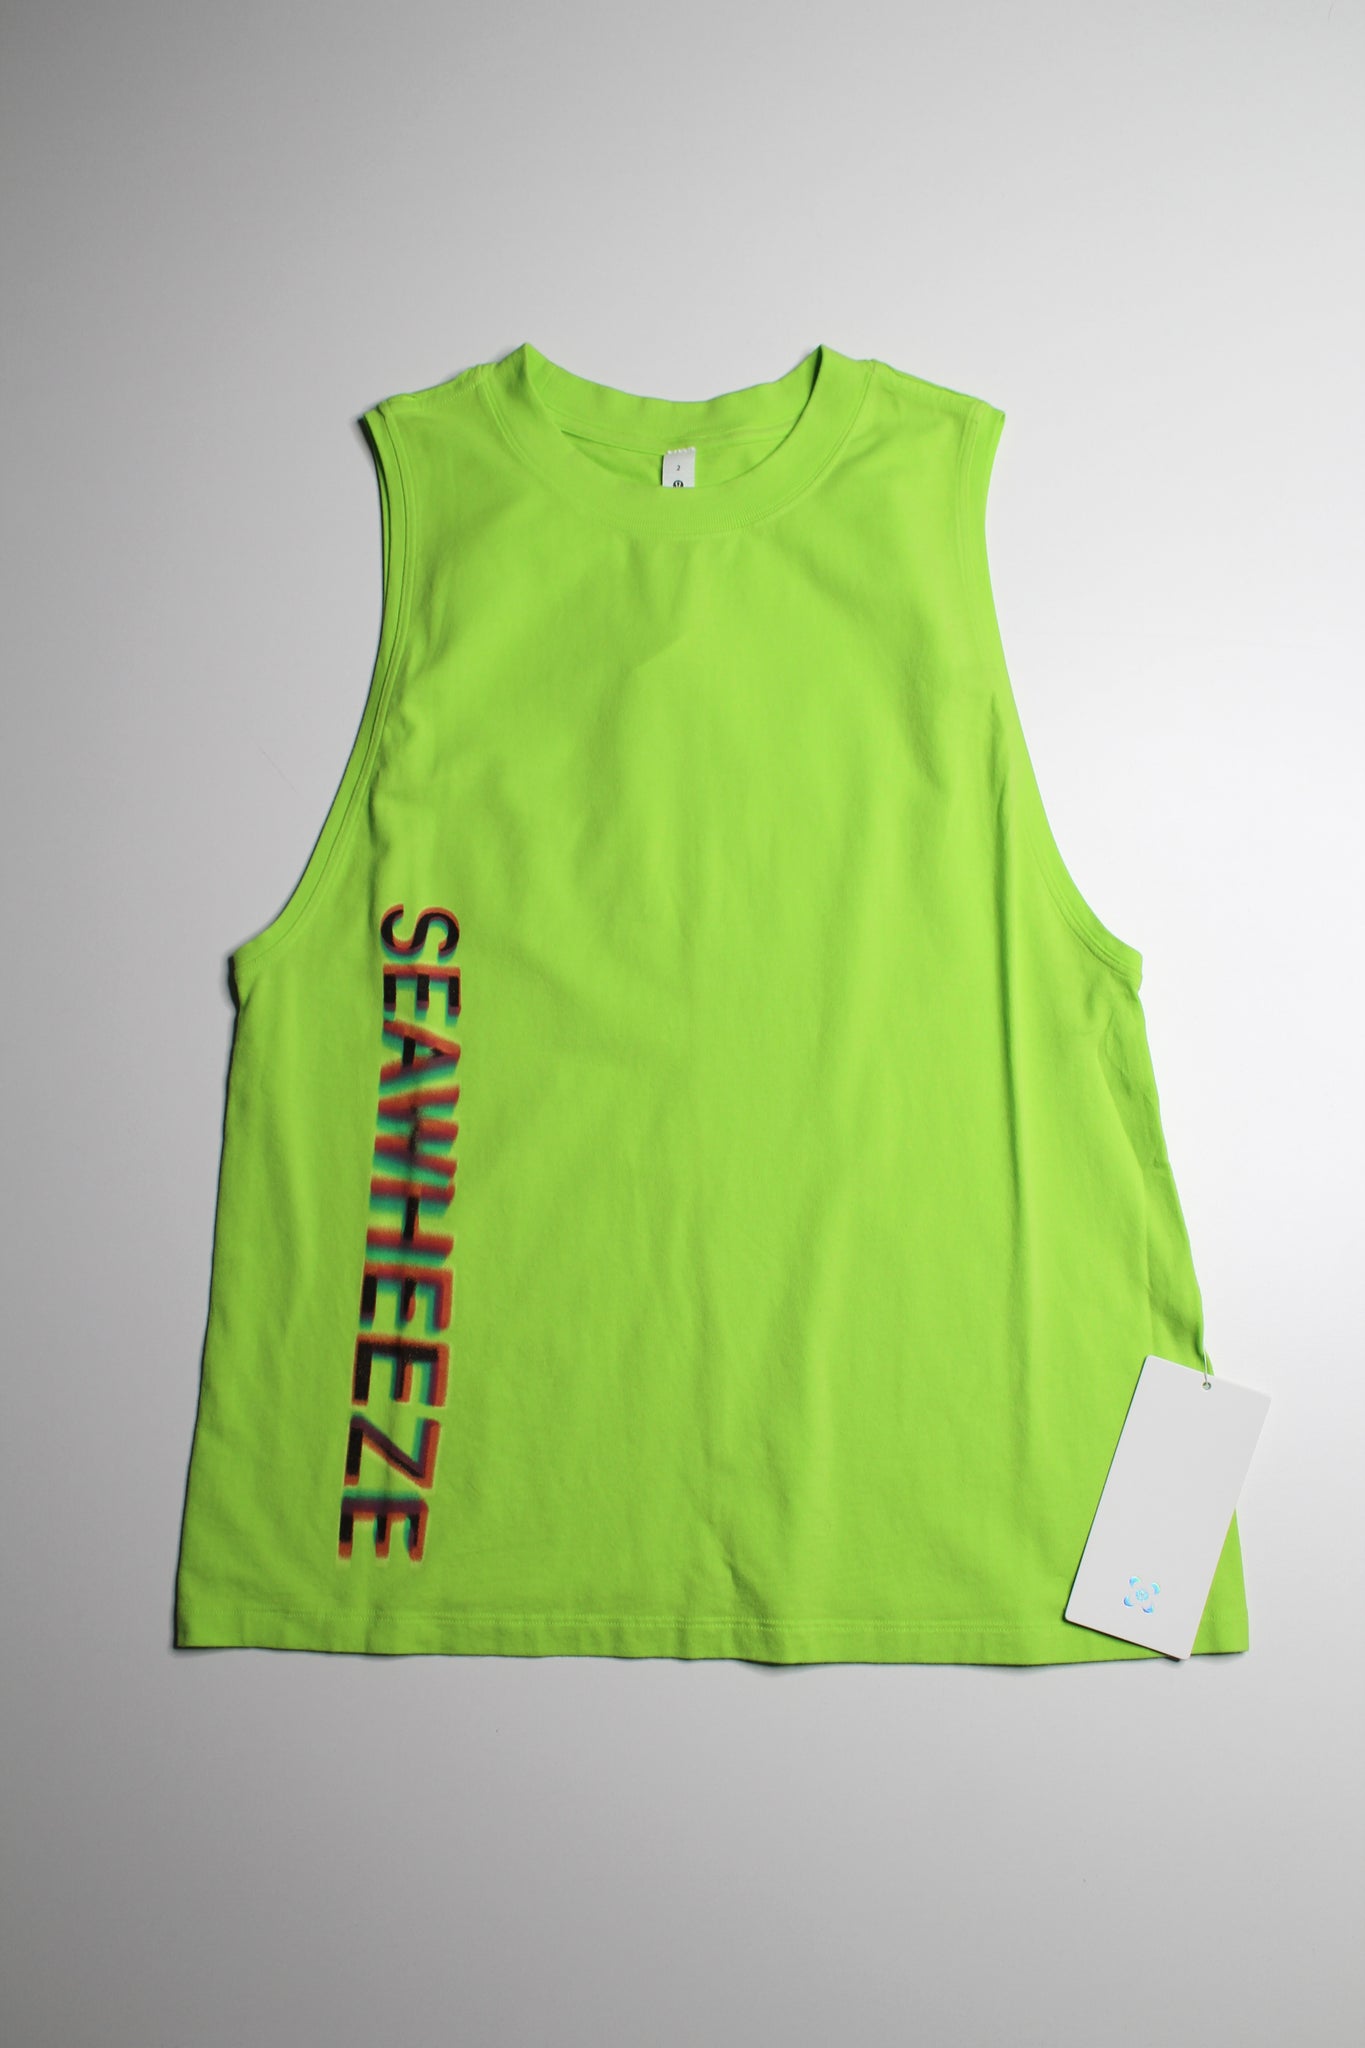 Lululemon seawheeze all yours tank, size 2 (loose fit) fits 2/4